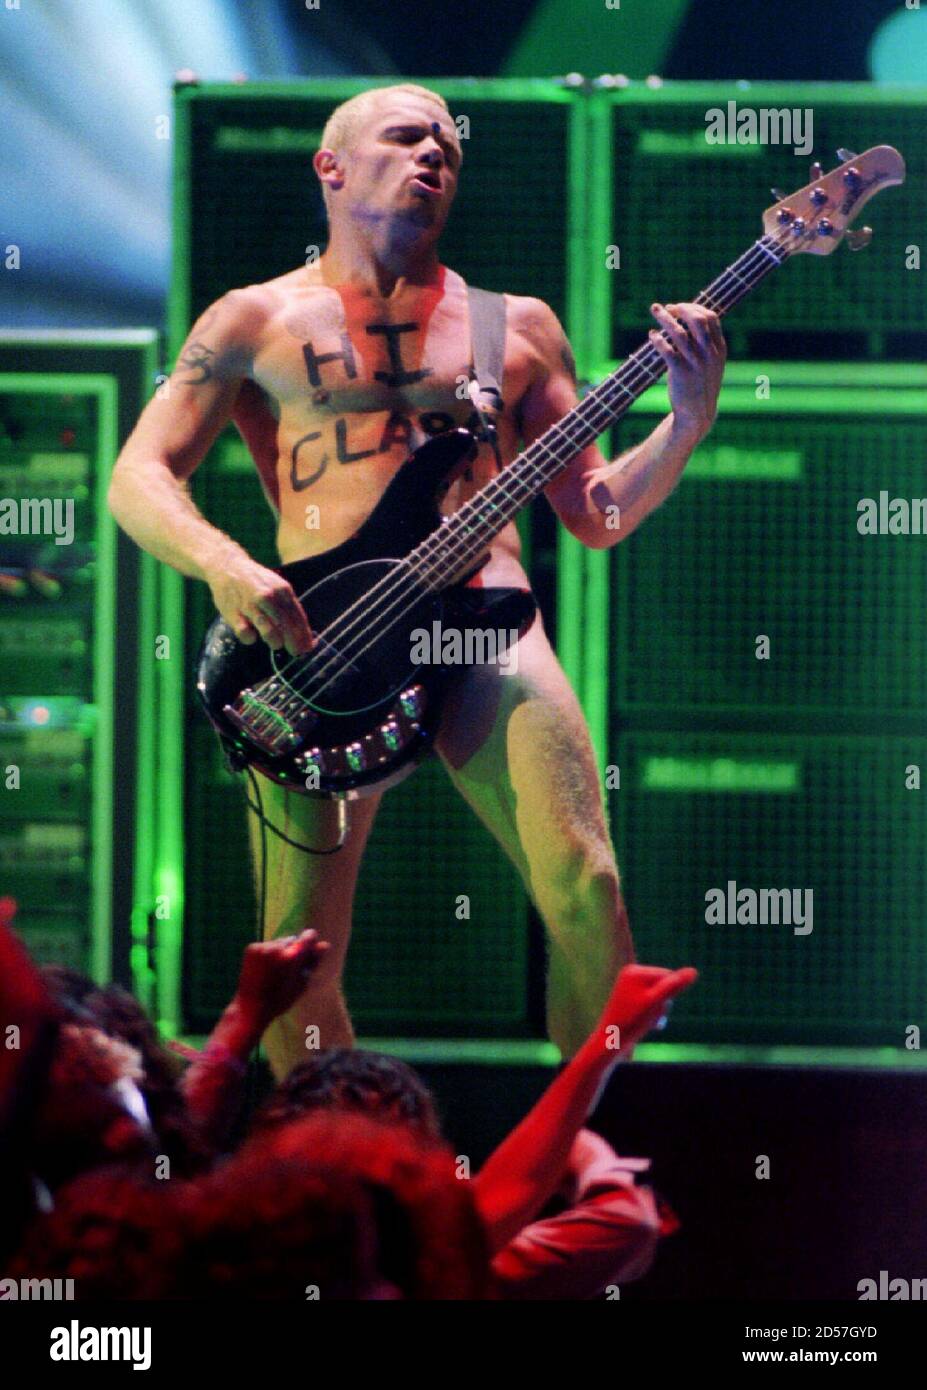 Bassist "Flea" of the band "Red Hot Chili Peppers" performs at the MTV  Video Music Awards at Radio City Music Hall in New York, September 7.  "Flea" was wearing bikini style briefs